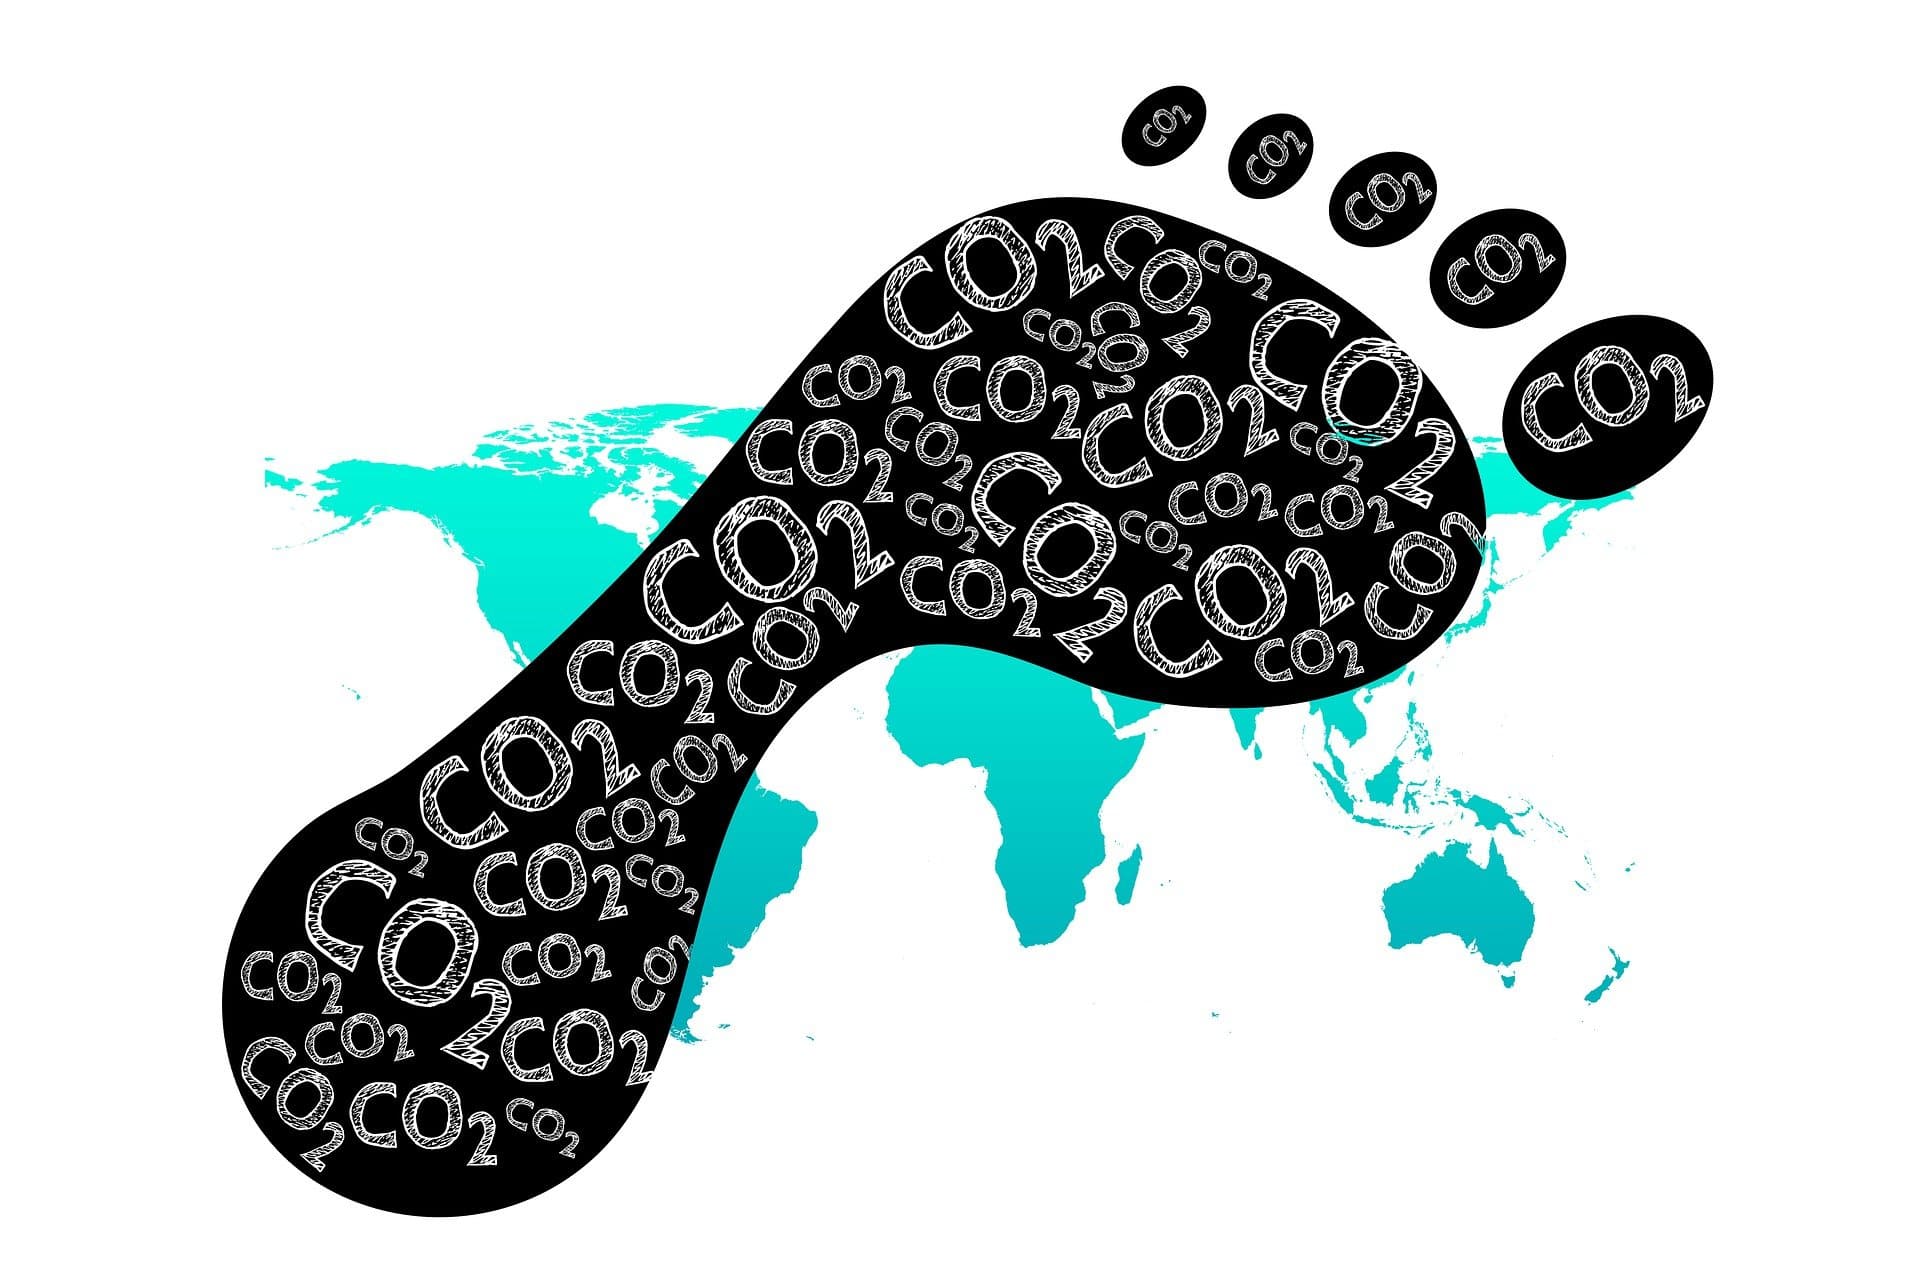 An image of a literal carbon footprint superimposed over a map of the world